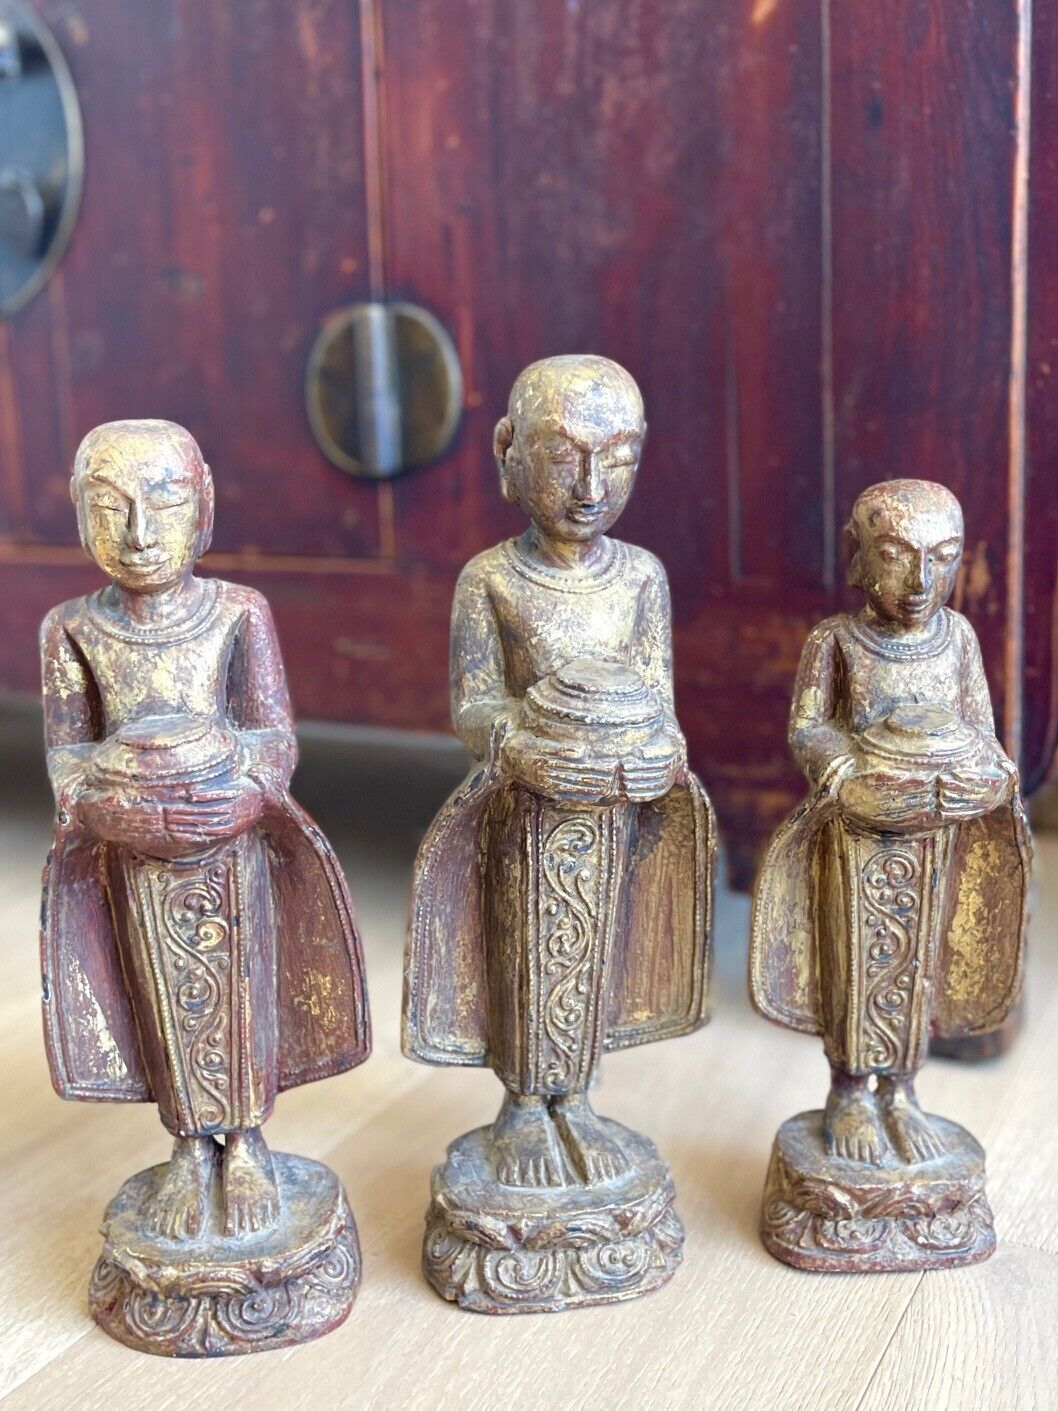 Three Vintage Golden Monks Statues (Burma/Myanmar) - 12 Inches Tall